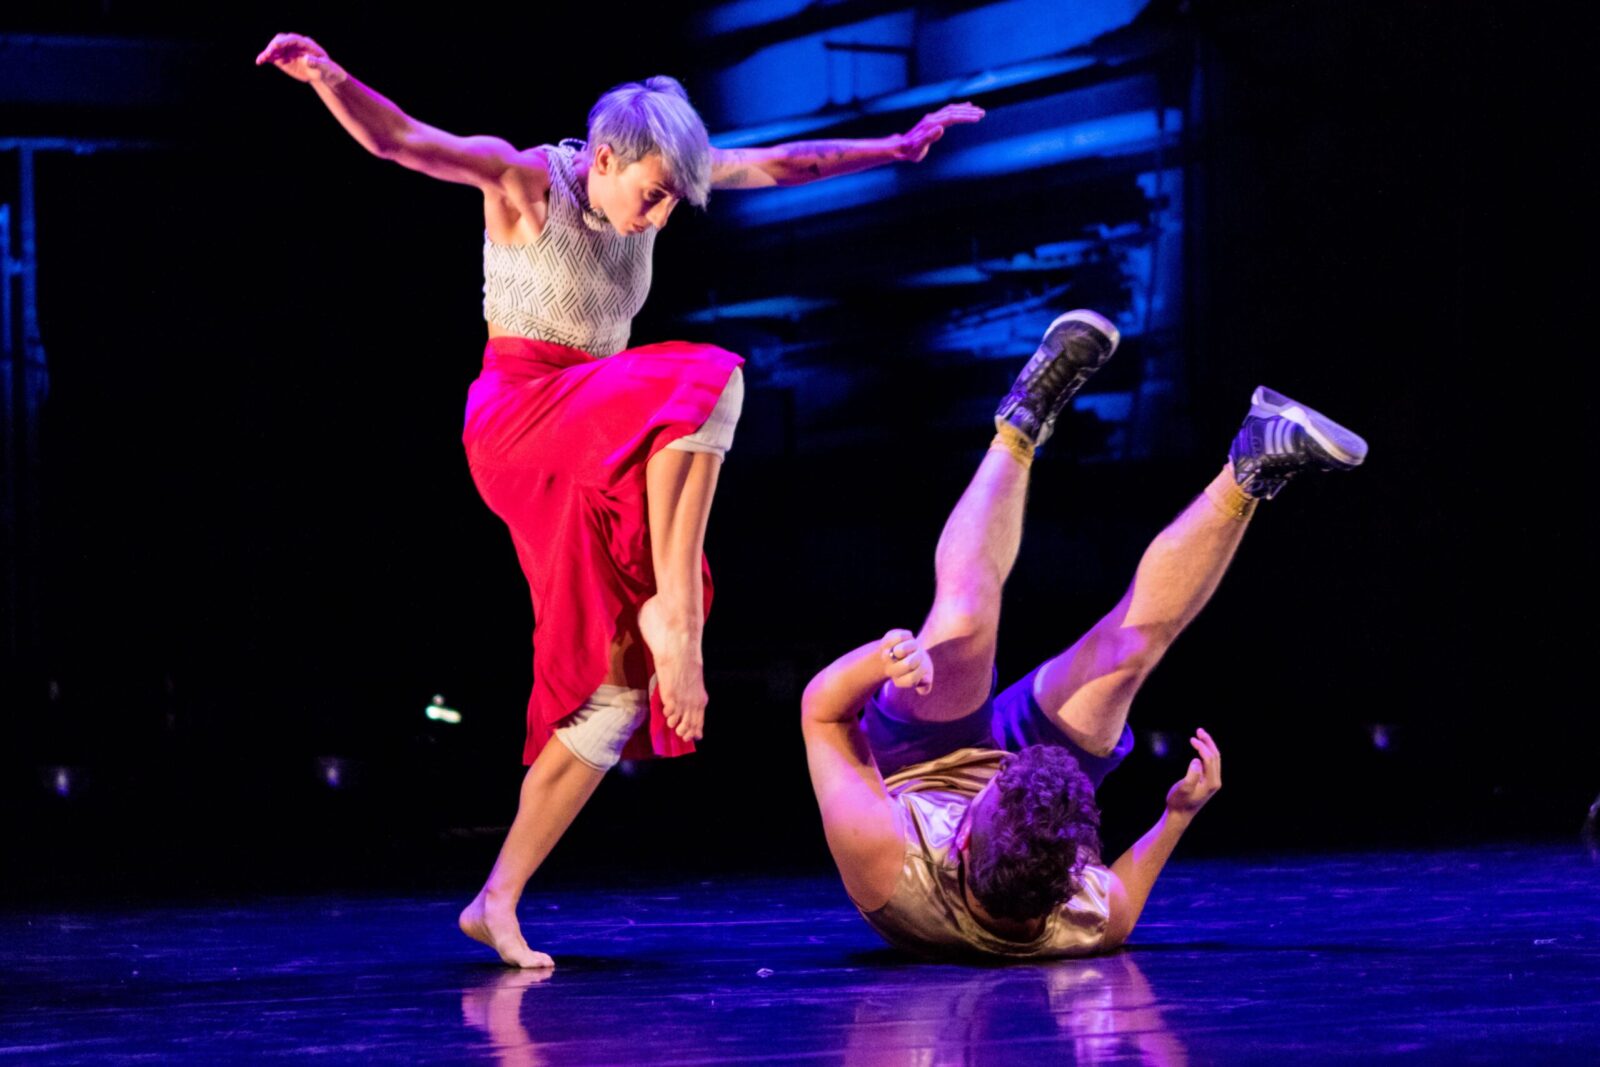 A dancer hovers over another dancer who is rolling on the ground